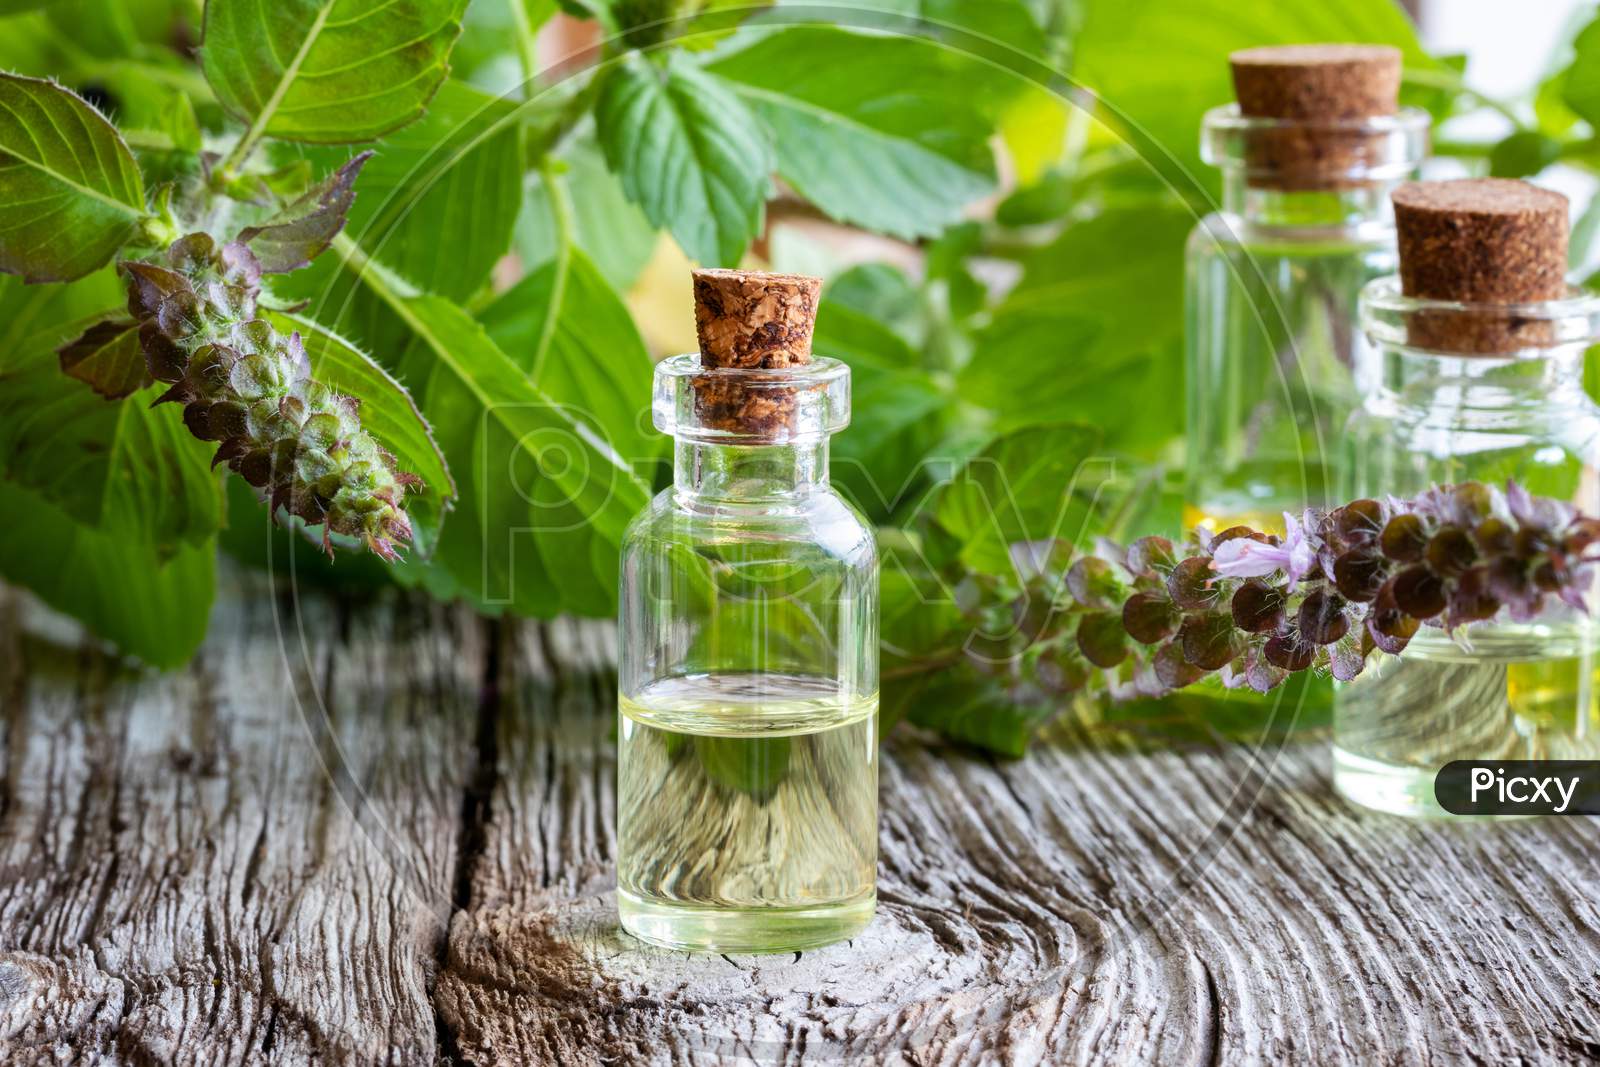 A Bottle Of Tulsi Essential Oil With Fresh Tulsi, Or Holy Basil